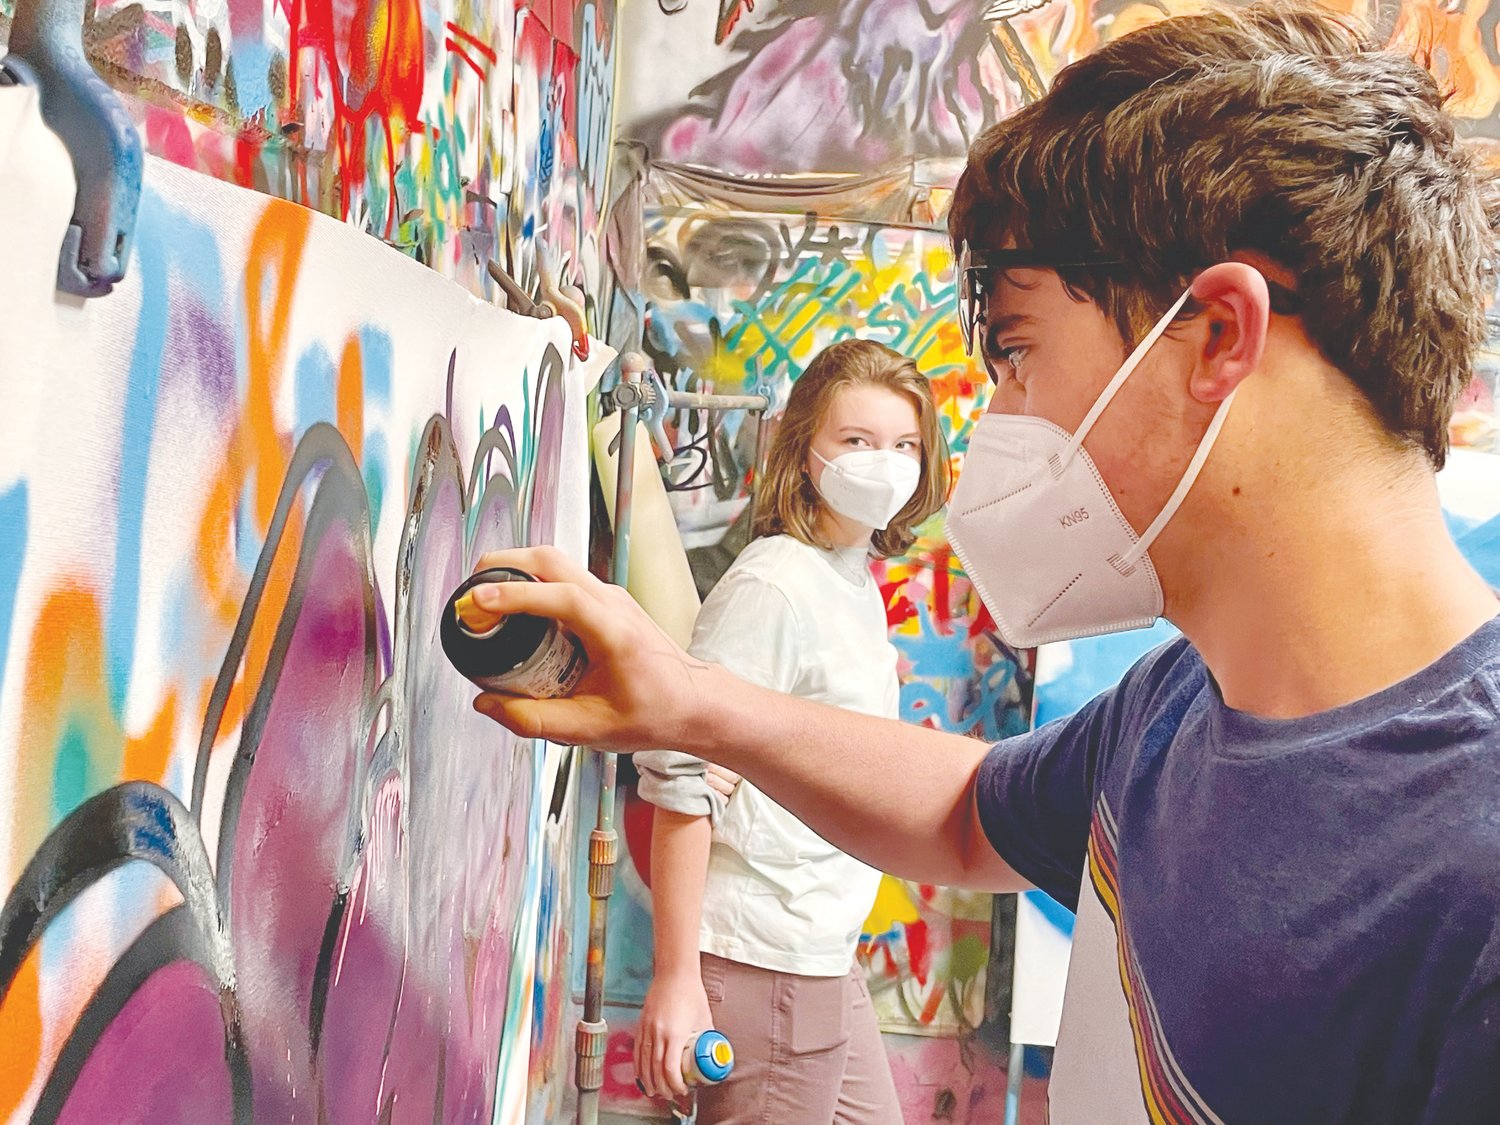 Louis Graham, right, gives graffiti technique a try as Emma Wieber watches. After learning about street art during a morning tour of the colorful Bushwick neighborhood in Brooklyn, acclaimed street artist Leaf taught J-M students some basic spray paint techniques and worked with them to create two large canvases.